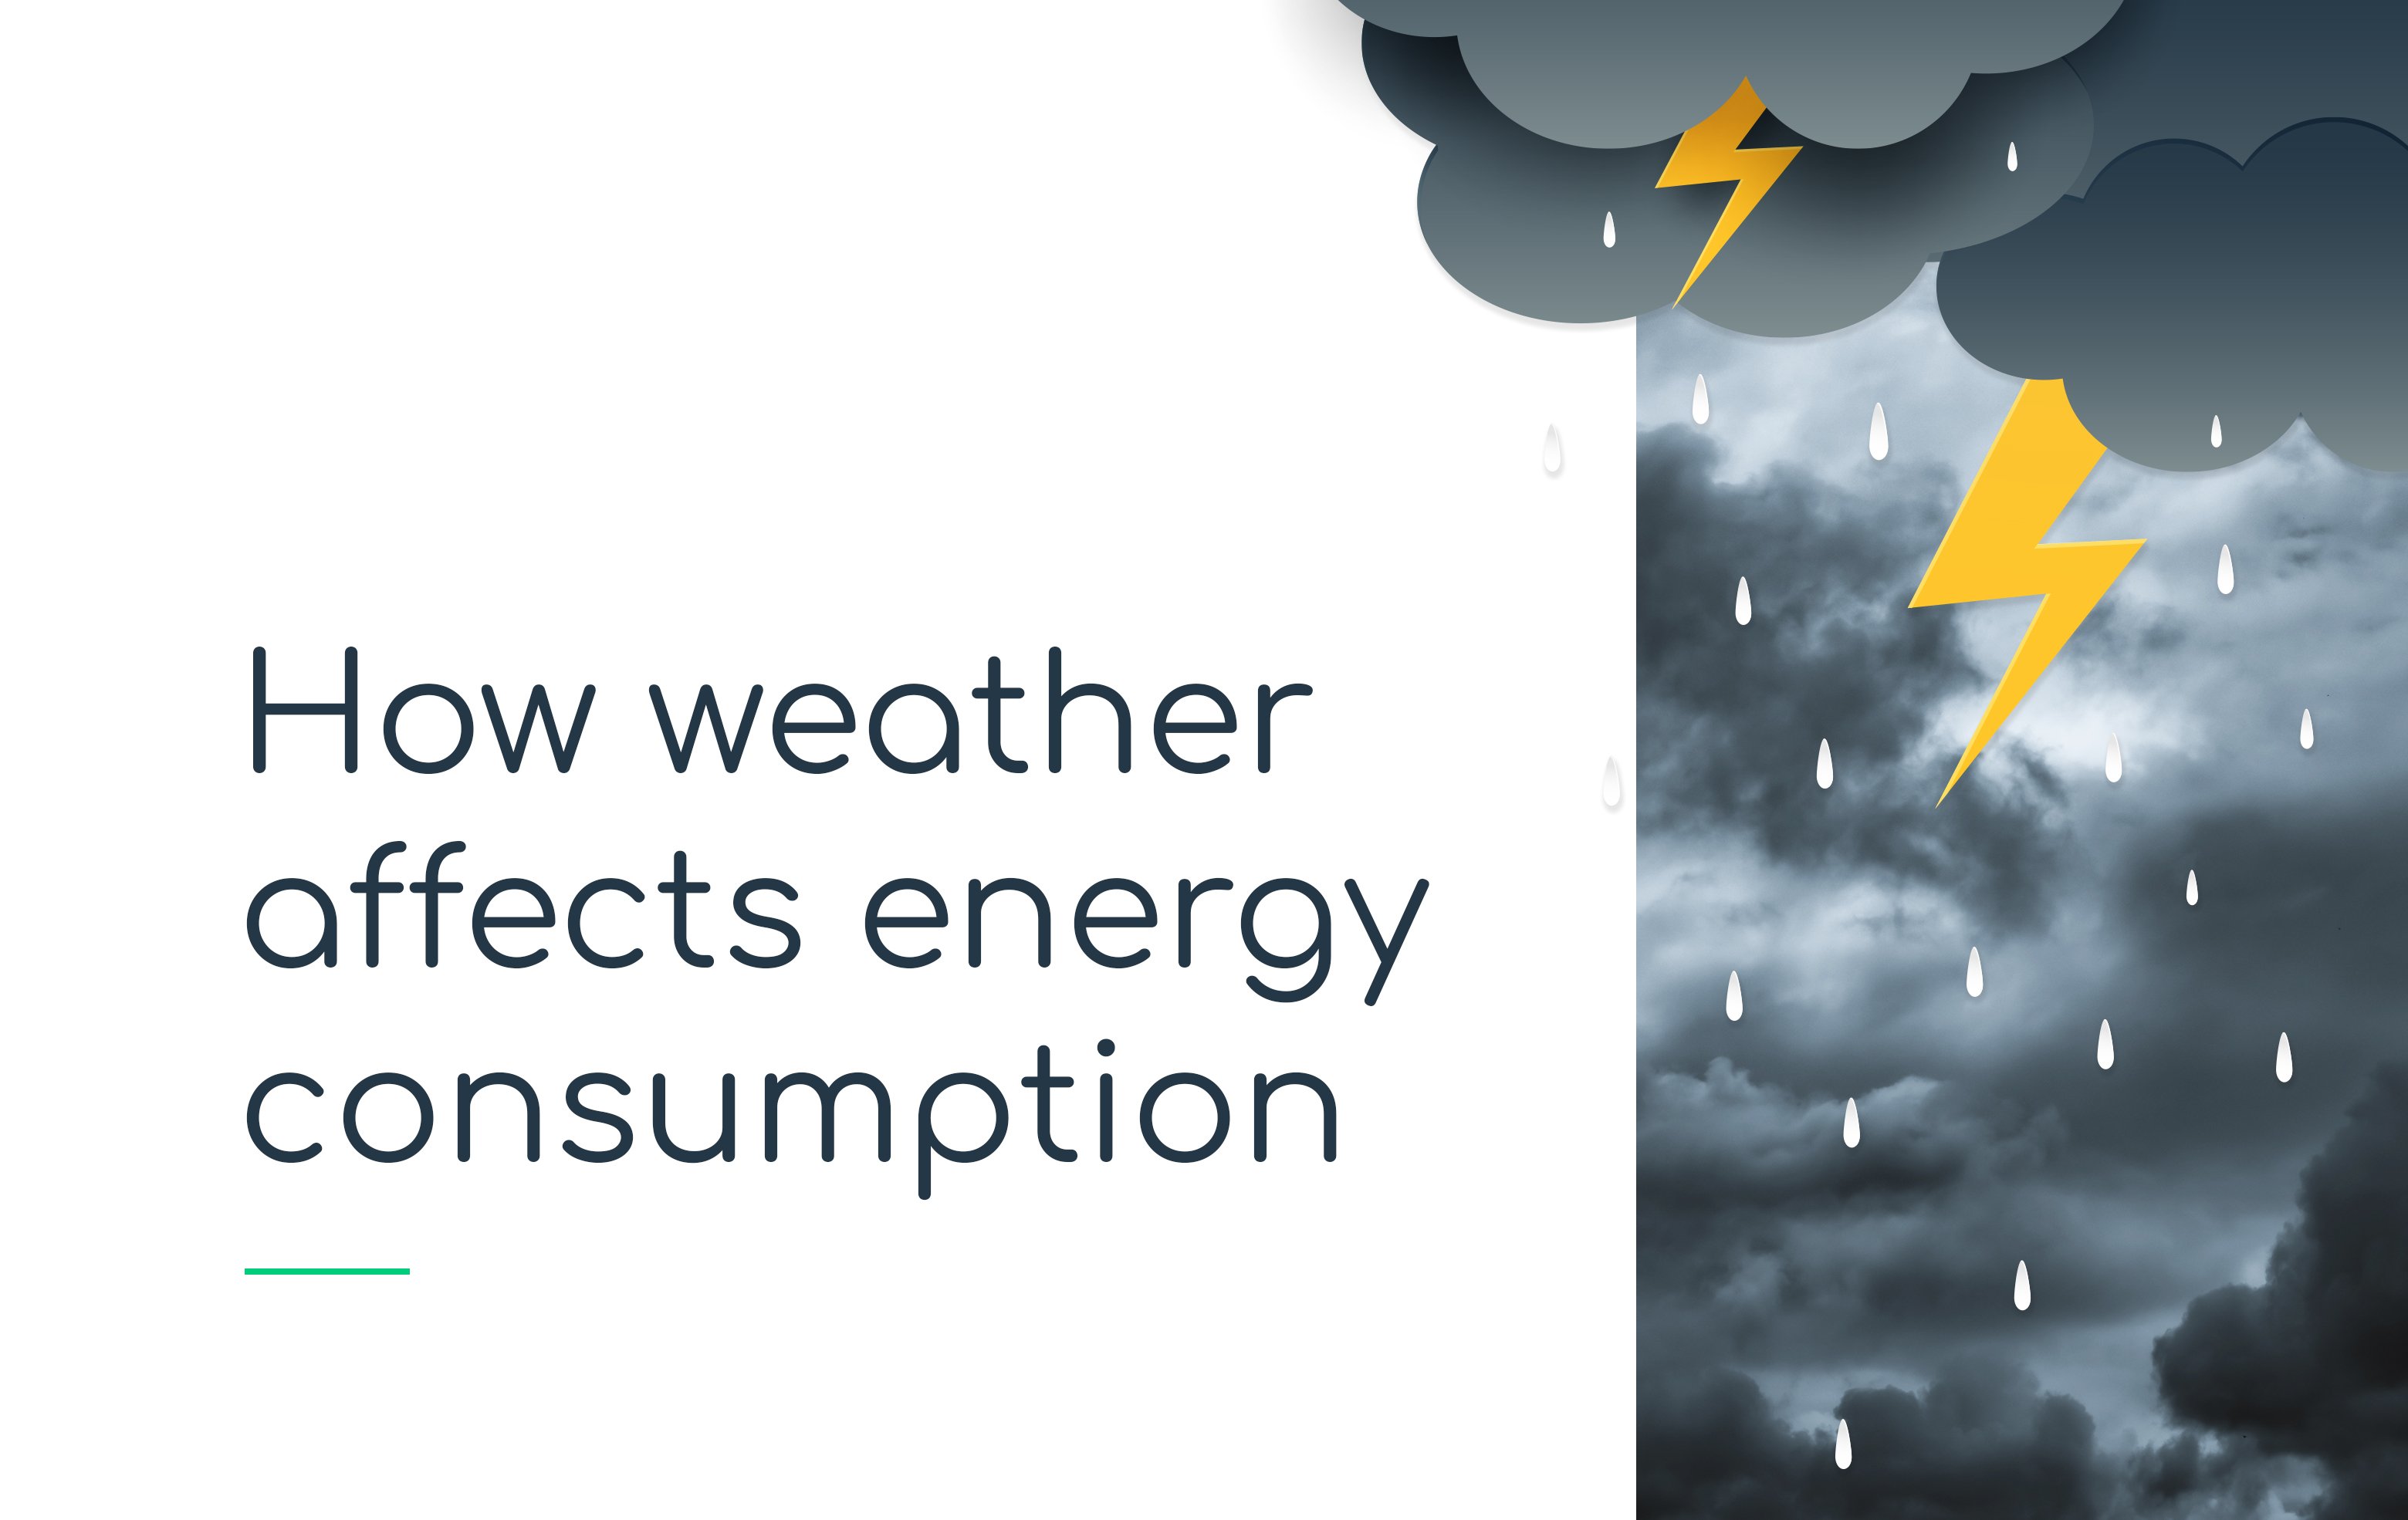 How weather affects energy consumption